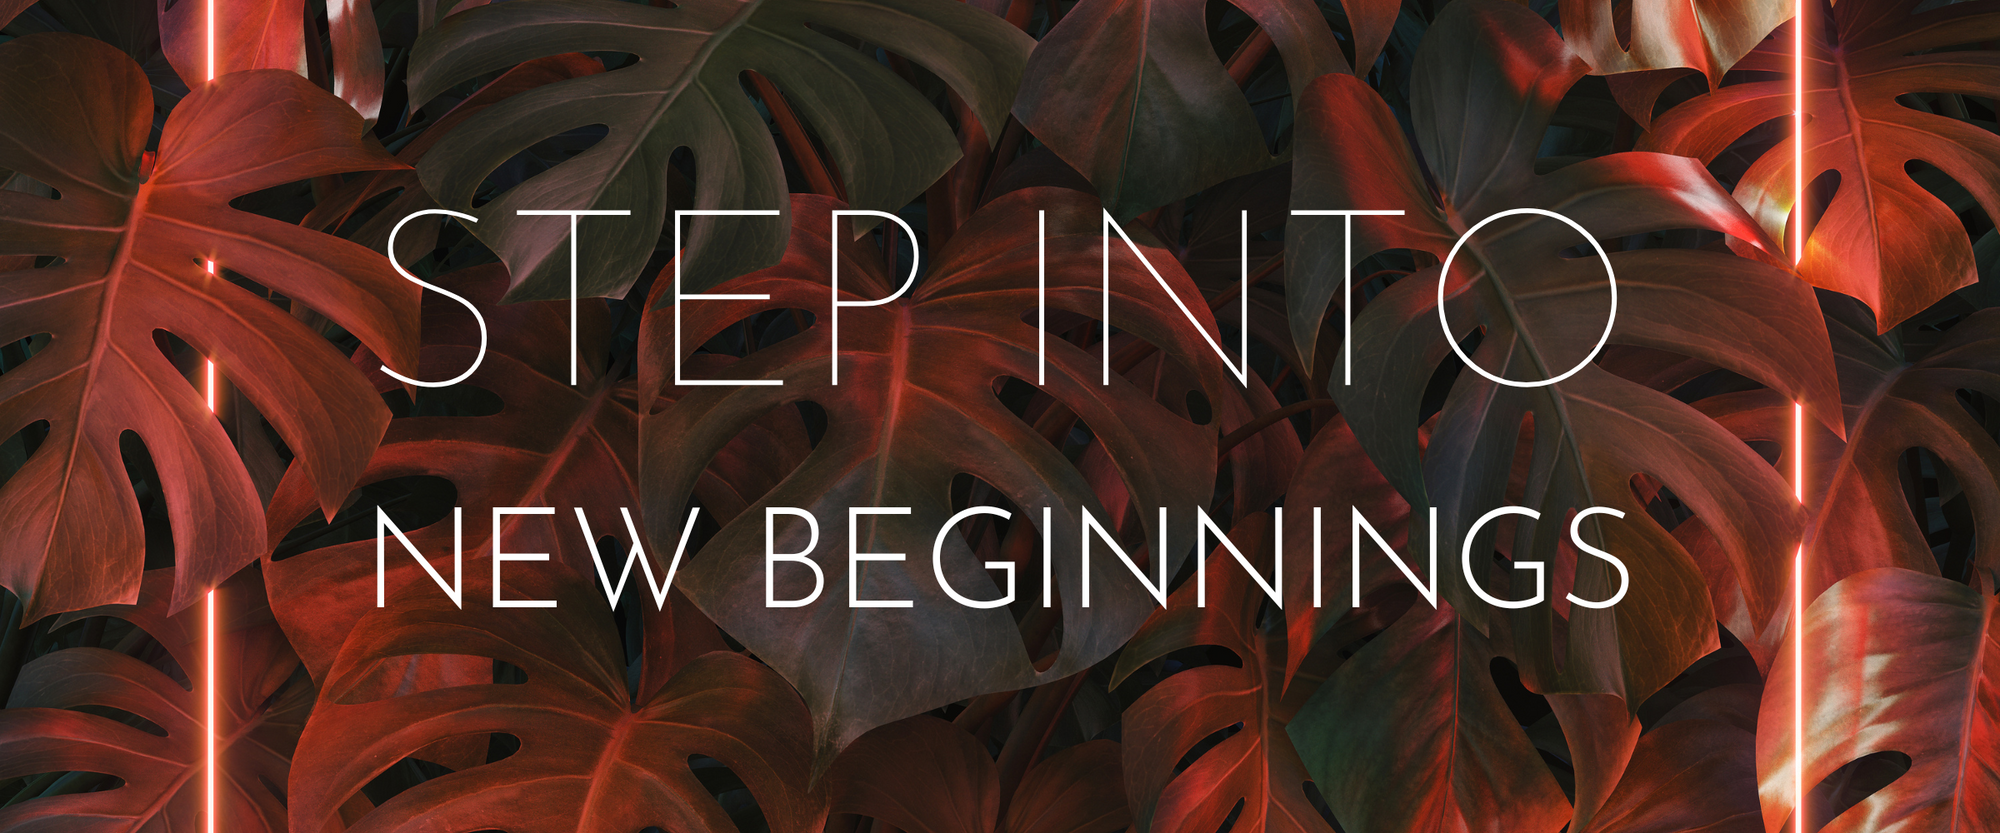 Step into New Beginnings with us...